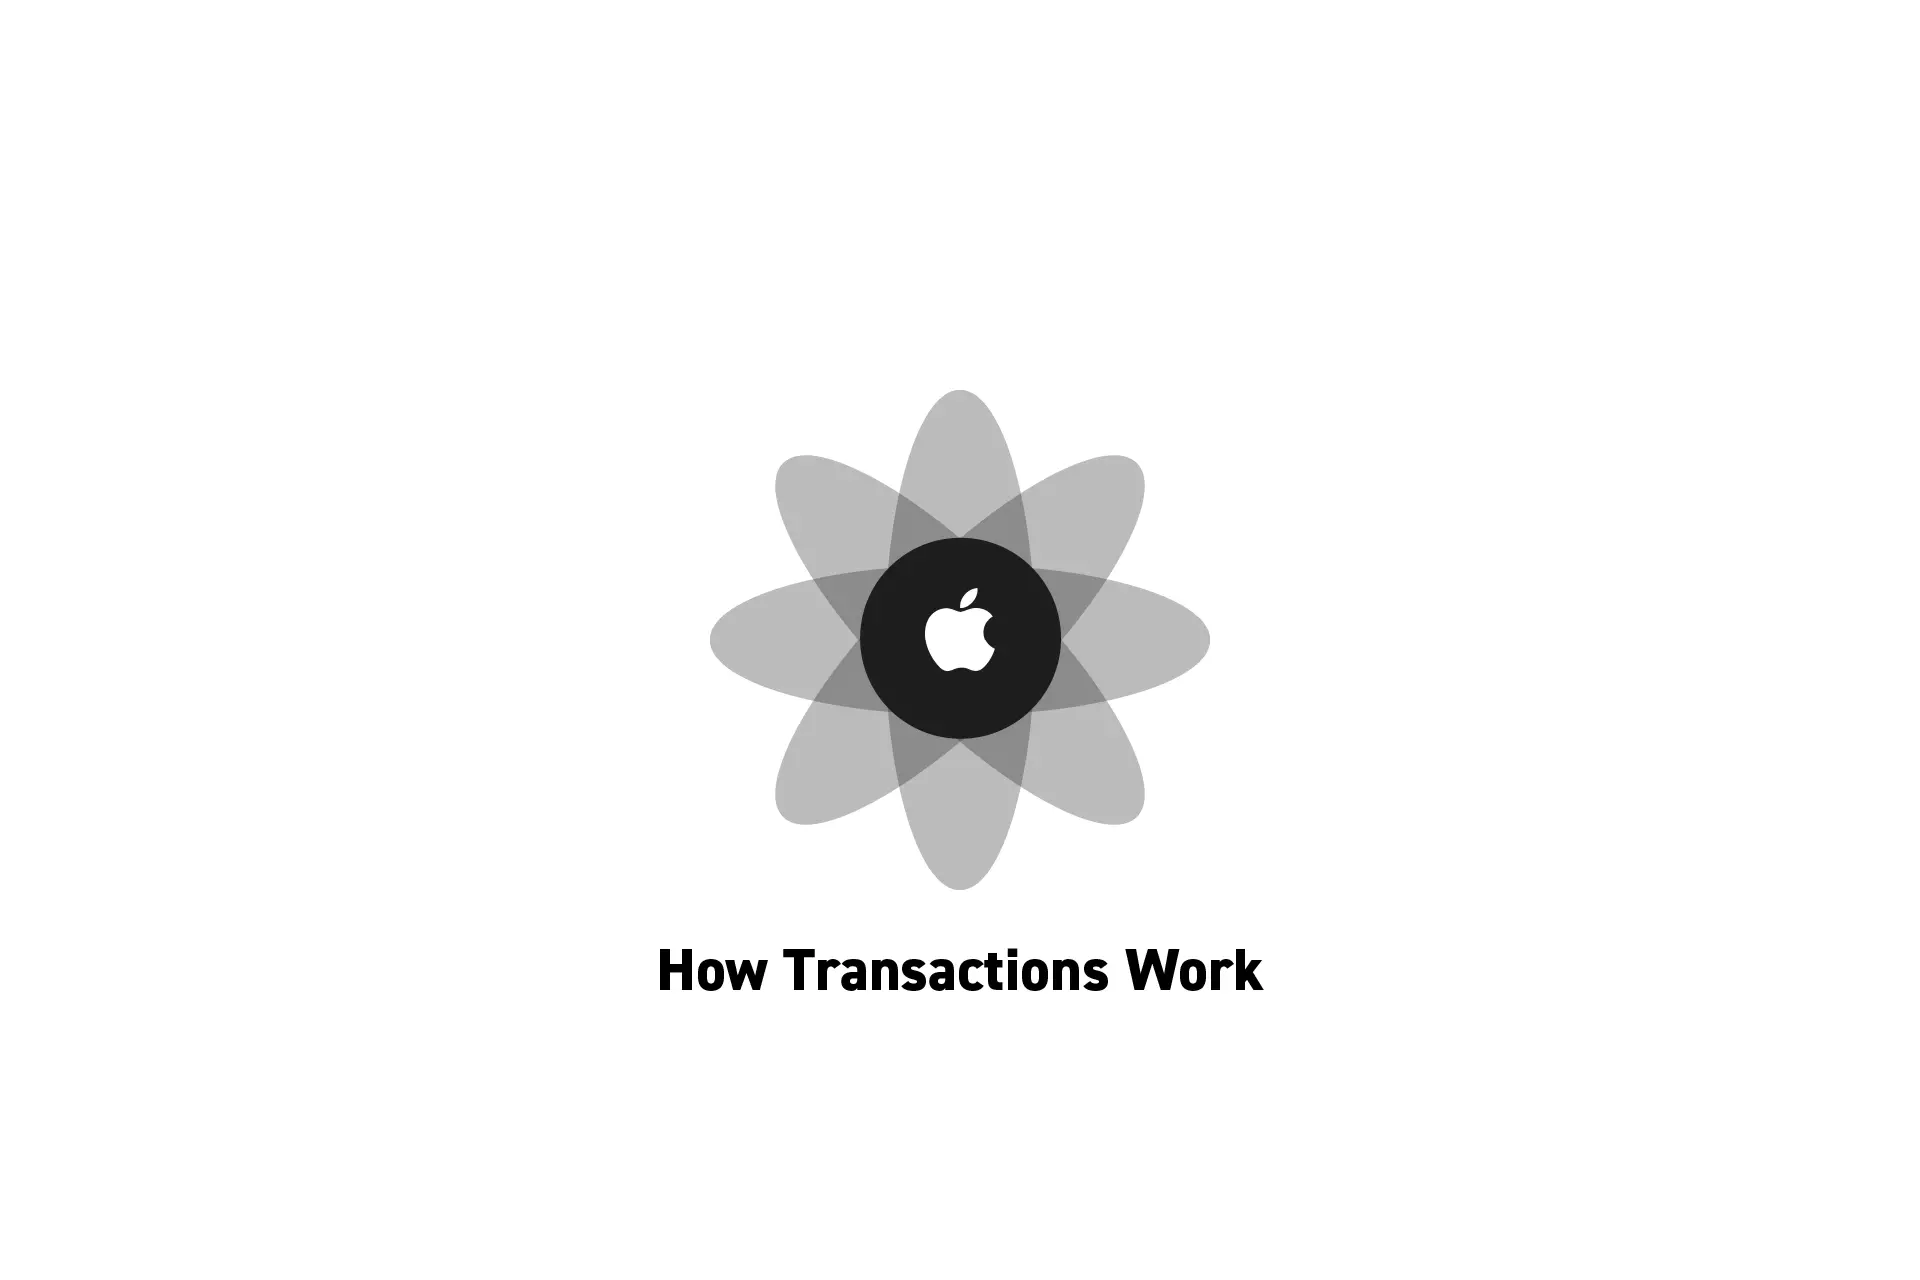 A flower that represents Apple with the text "How Transactions Work" beneath it.